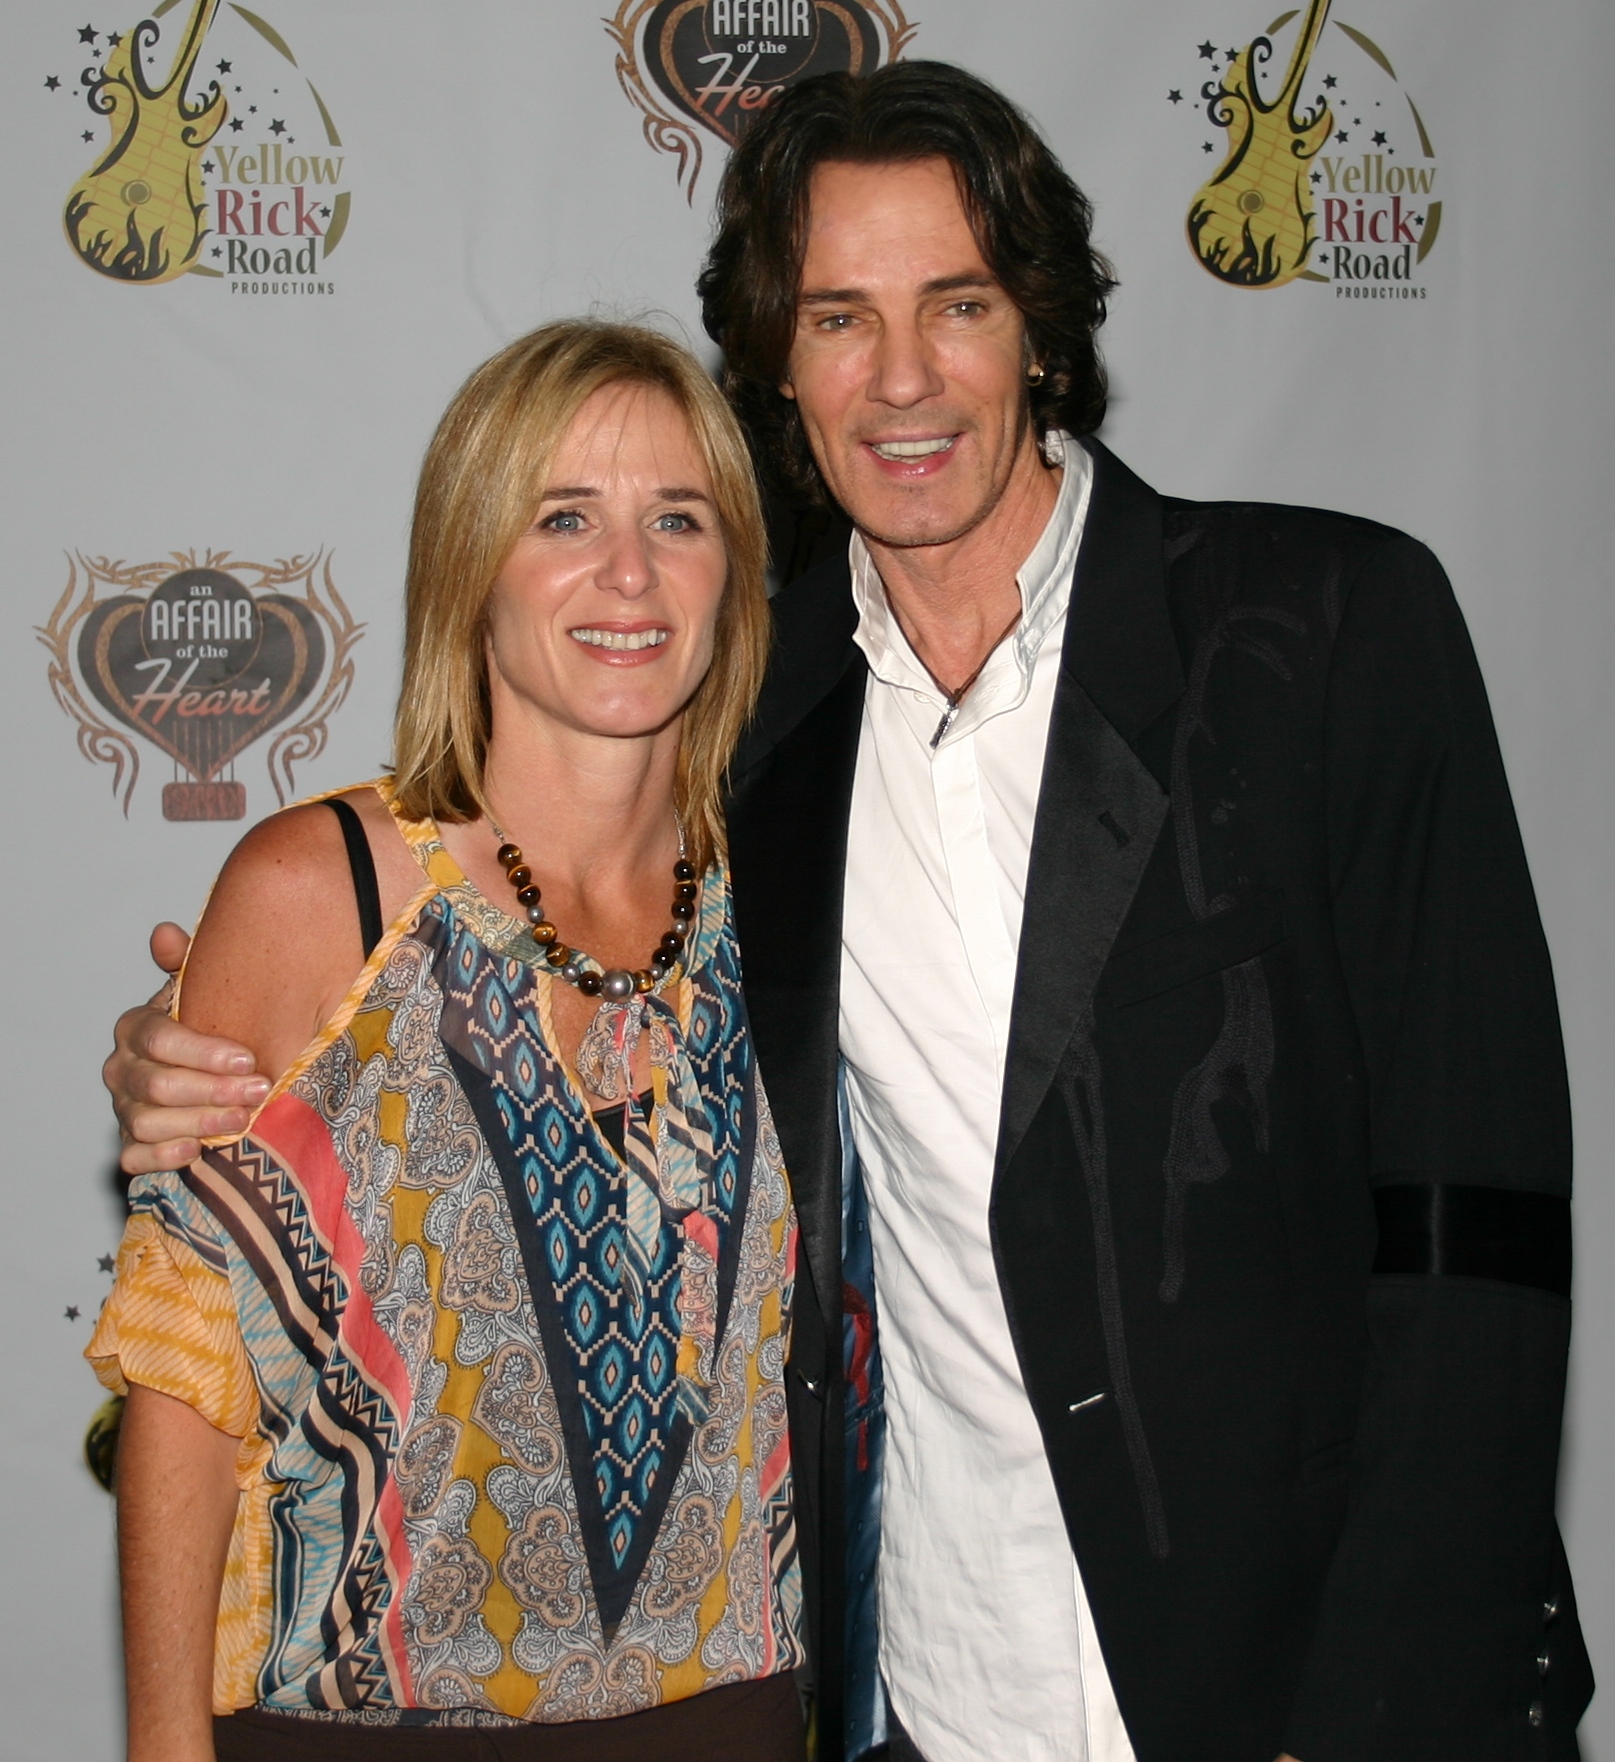 Sylvia Caminer and Rick Springfield at an event for An Affair of the Heart